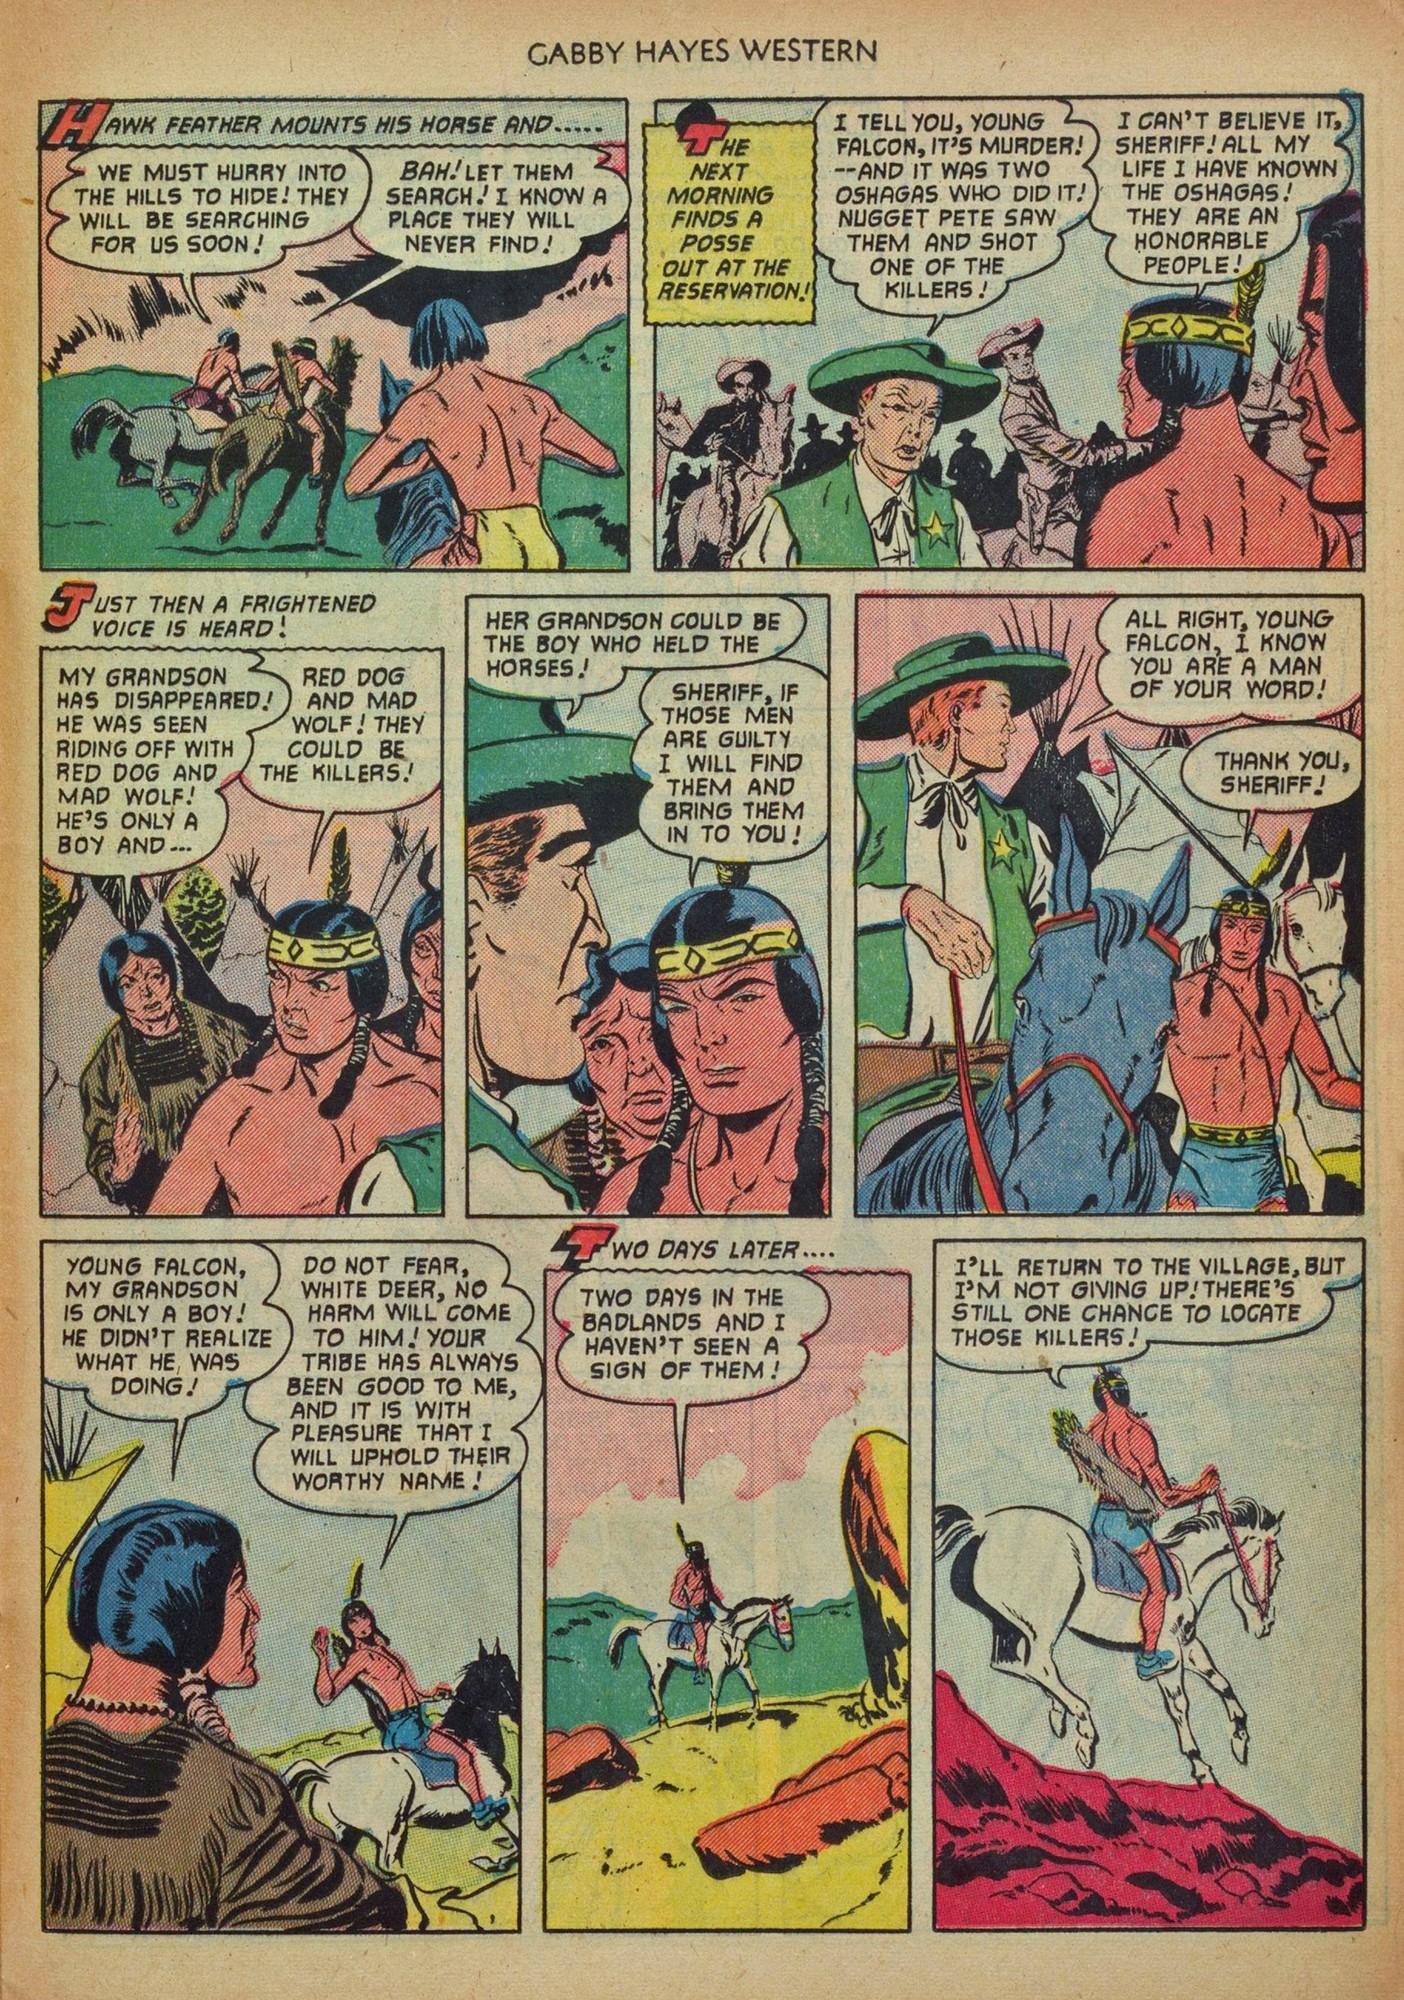 Read online Gabby Hayes Western comic -  Issue #44 - 25